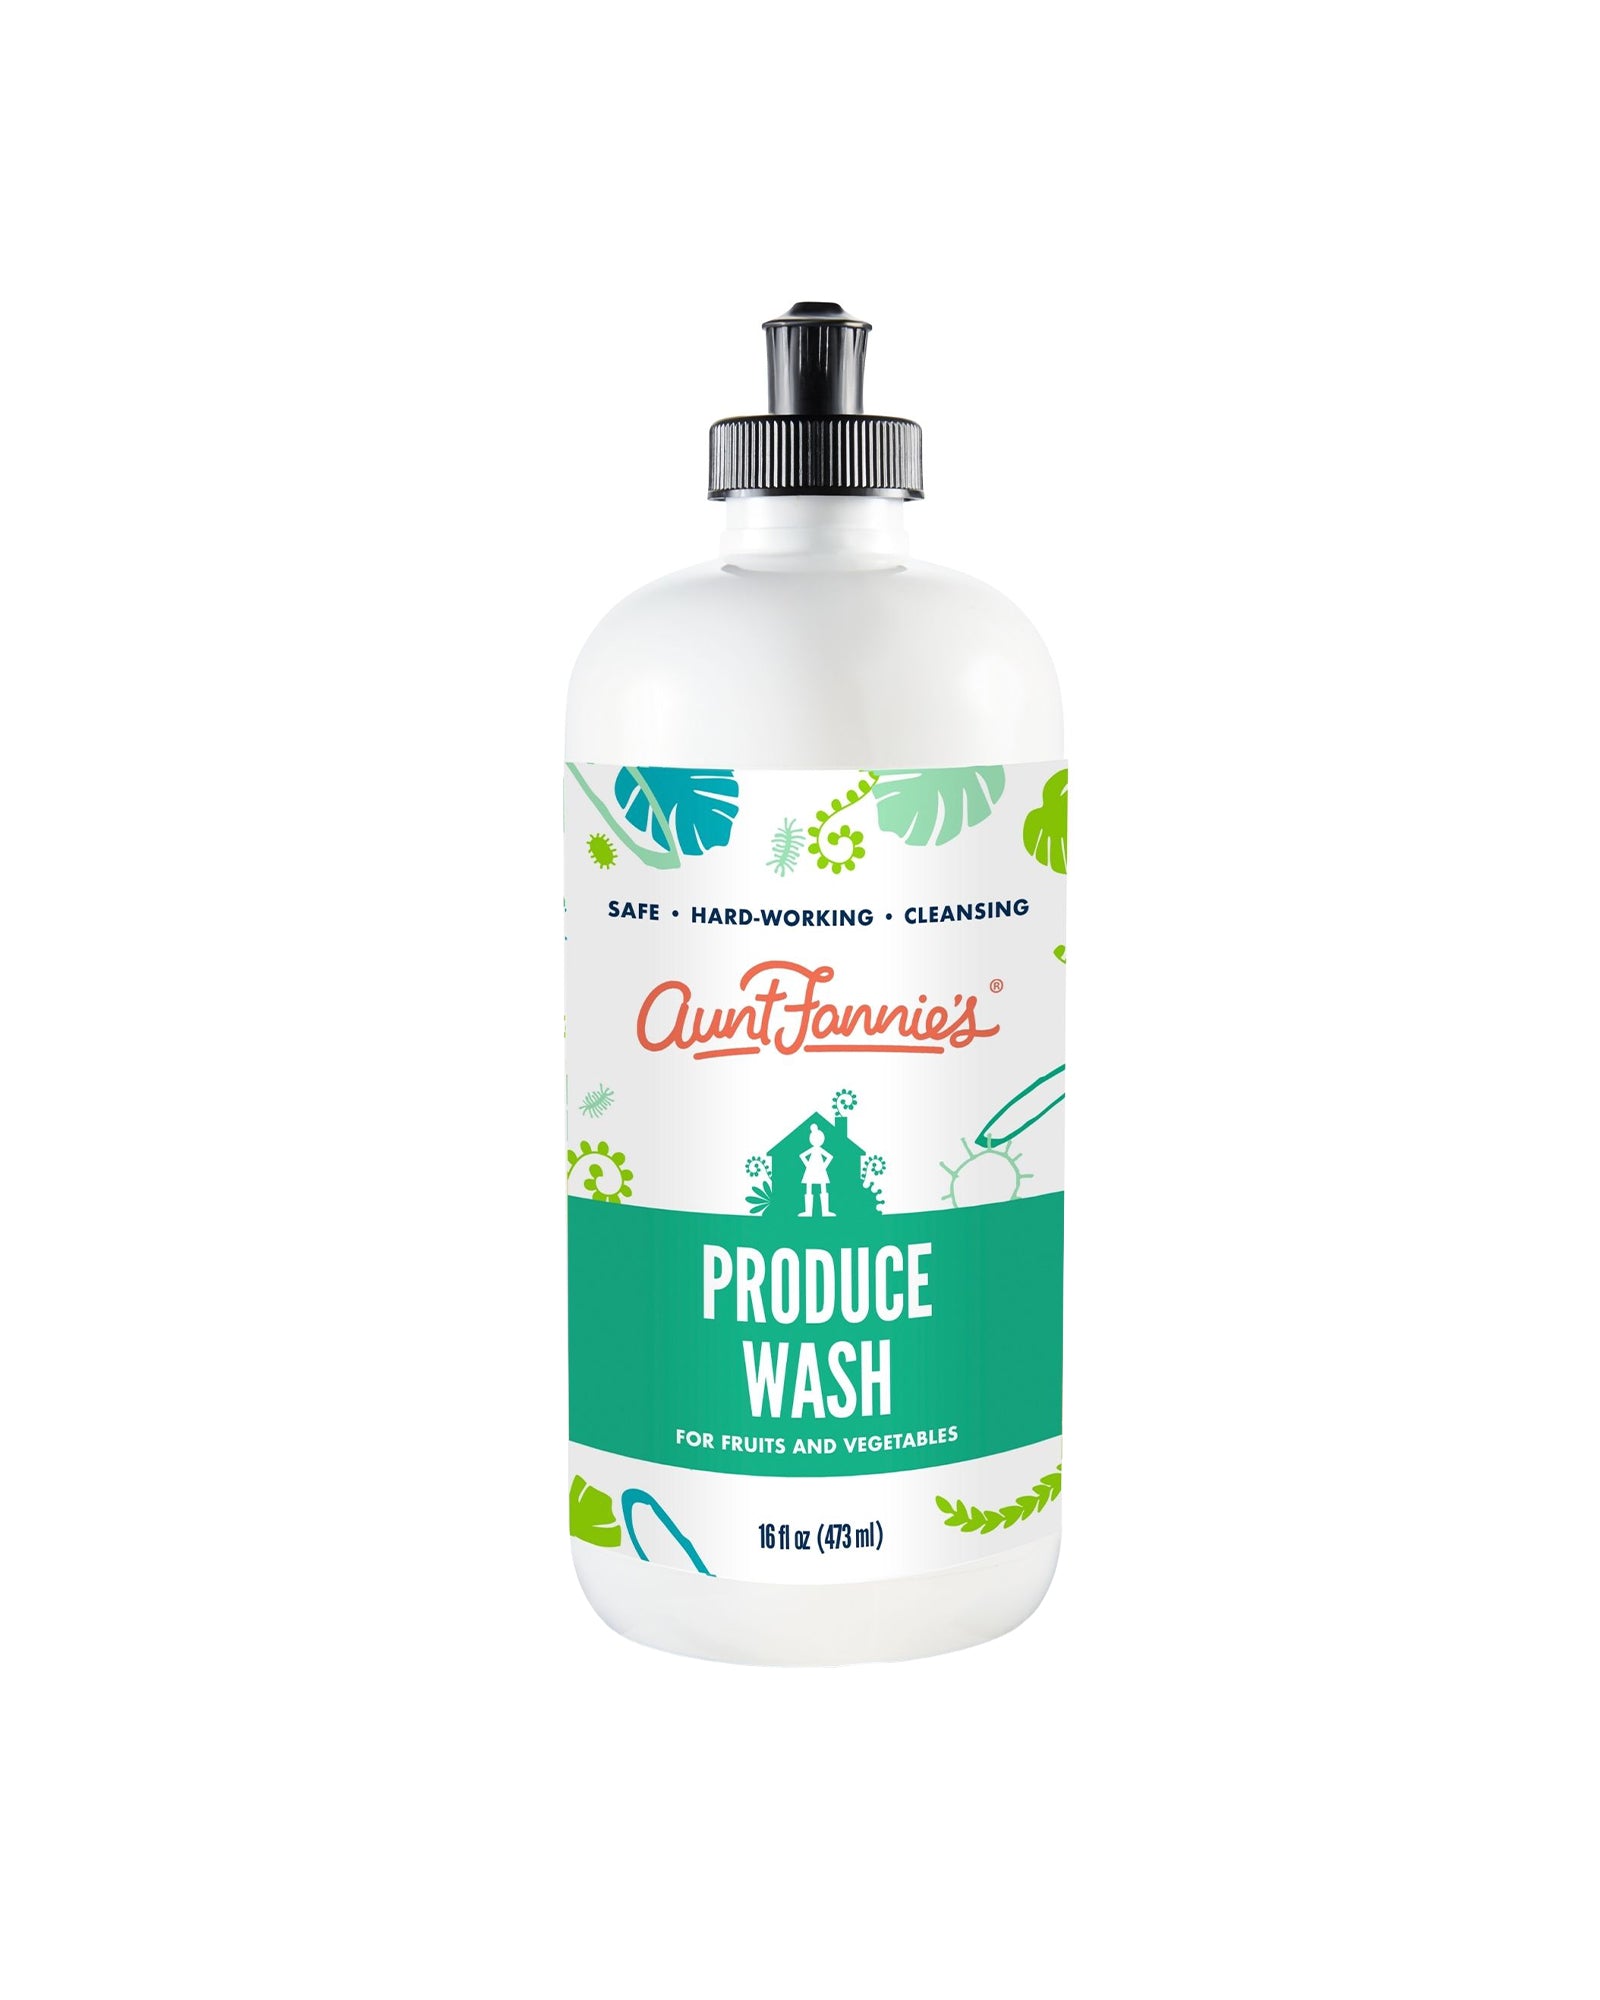 Veggie Wash Fruit & Vegetable Wash, Produce Wash and Cleaner, 16-Fluid Ounce